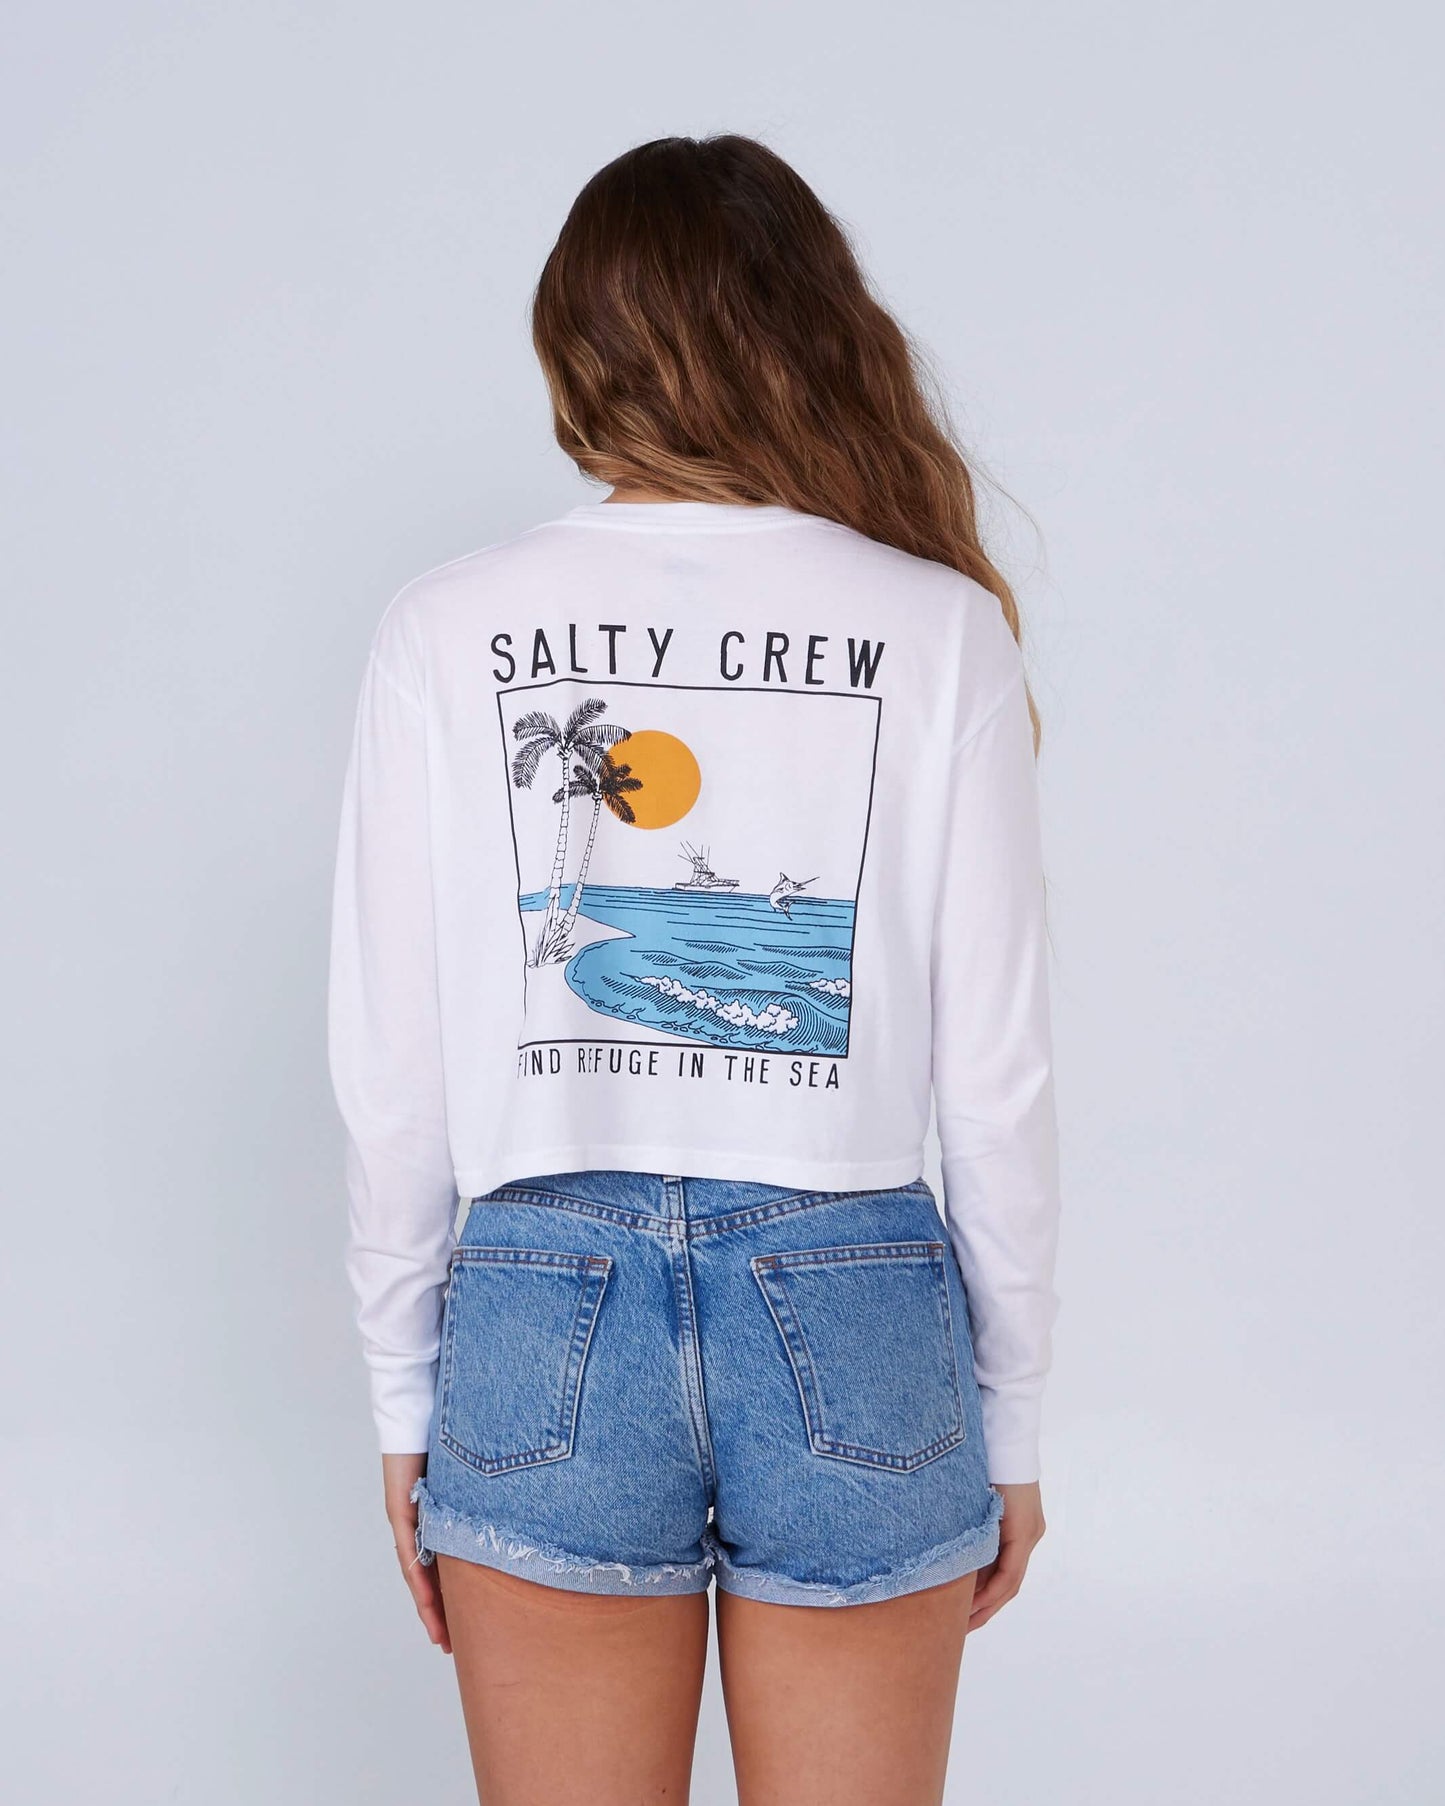 Salty Crew Femmes - The Good Life L/S Crop - - The Good Life L/S Crop - - The Good Life L/S Crop - - The Good Life L/S Crop White